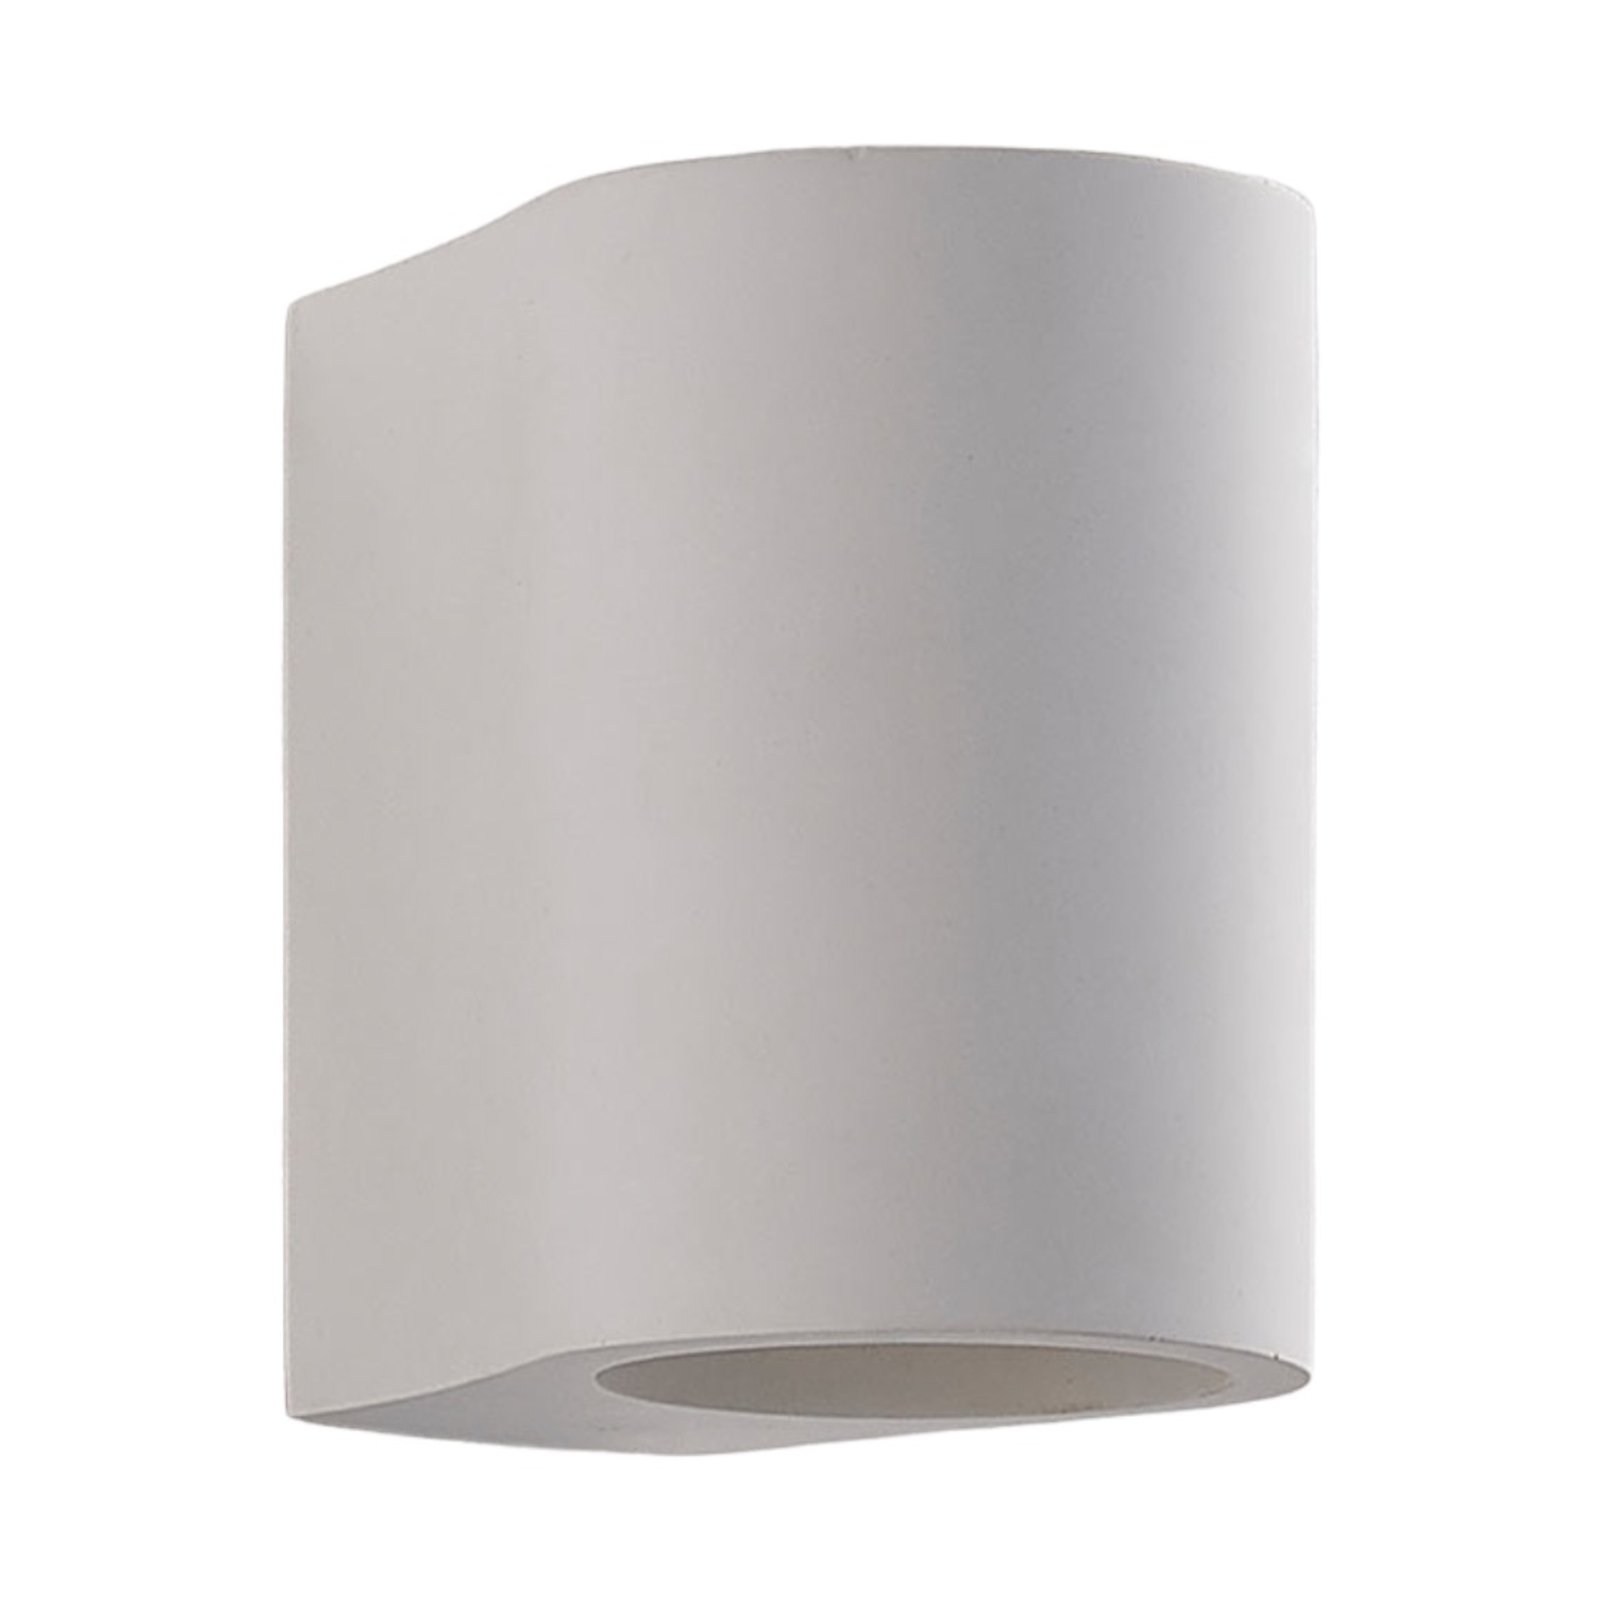 Lindby wall light Jannes, round, white, plaster, G9, paintable